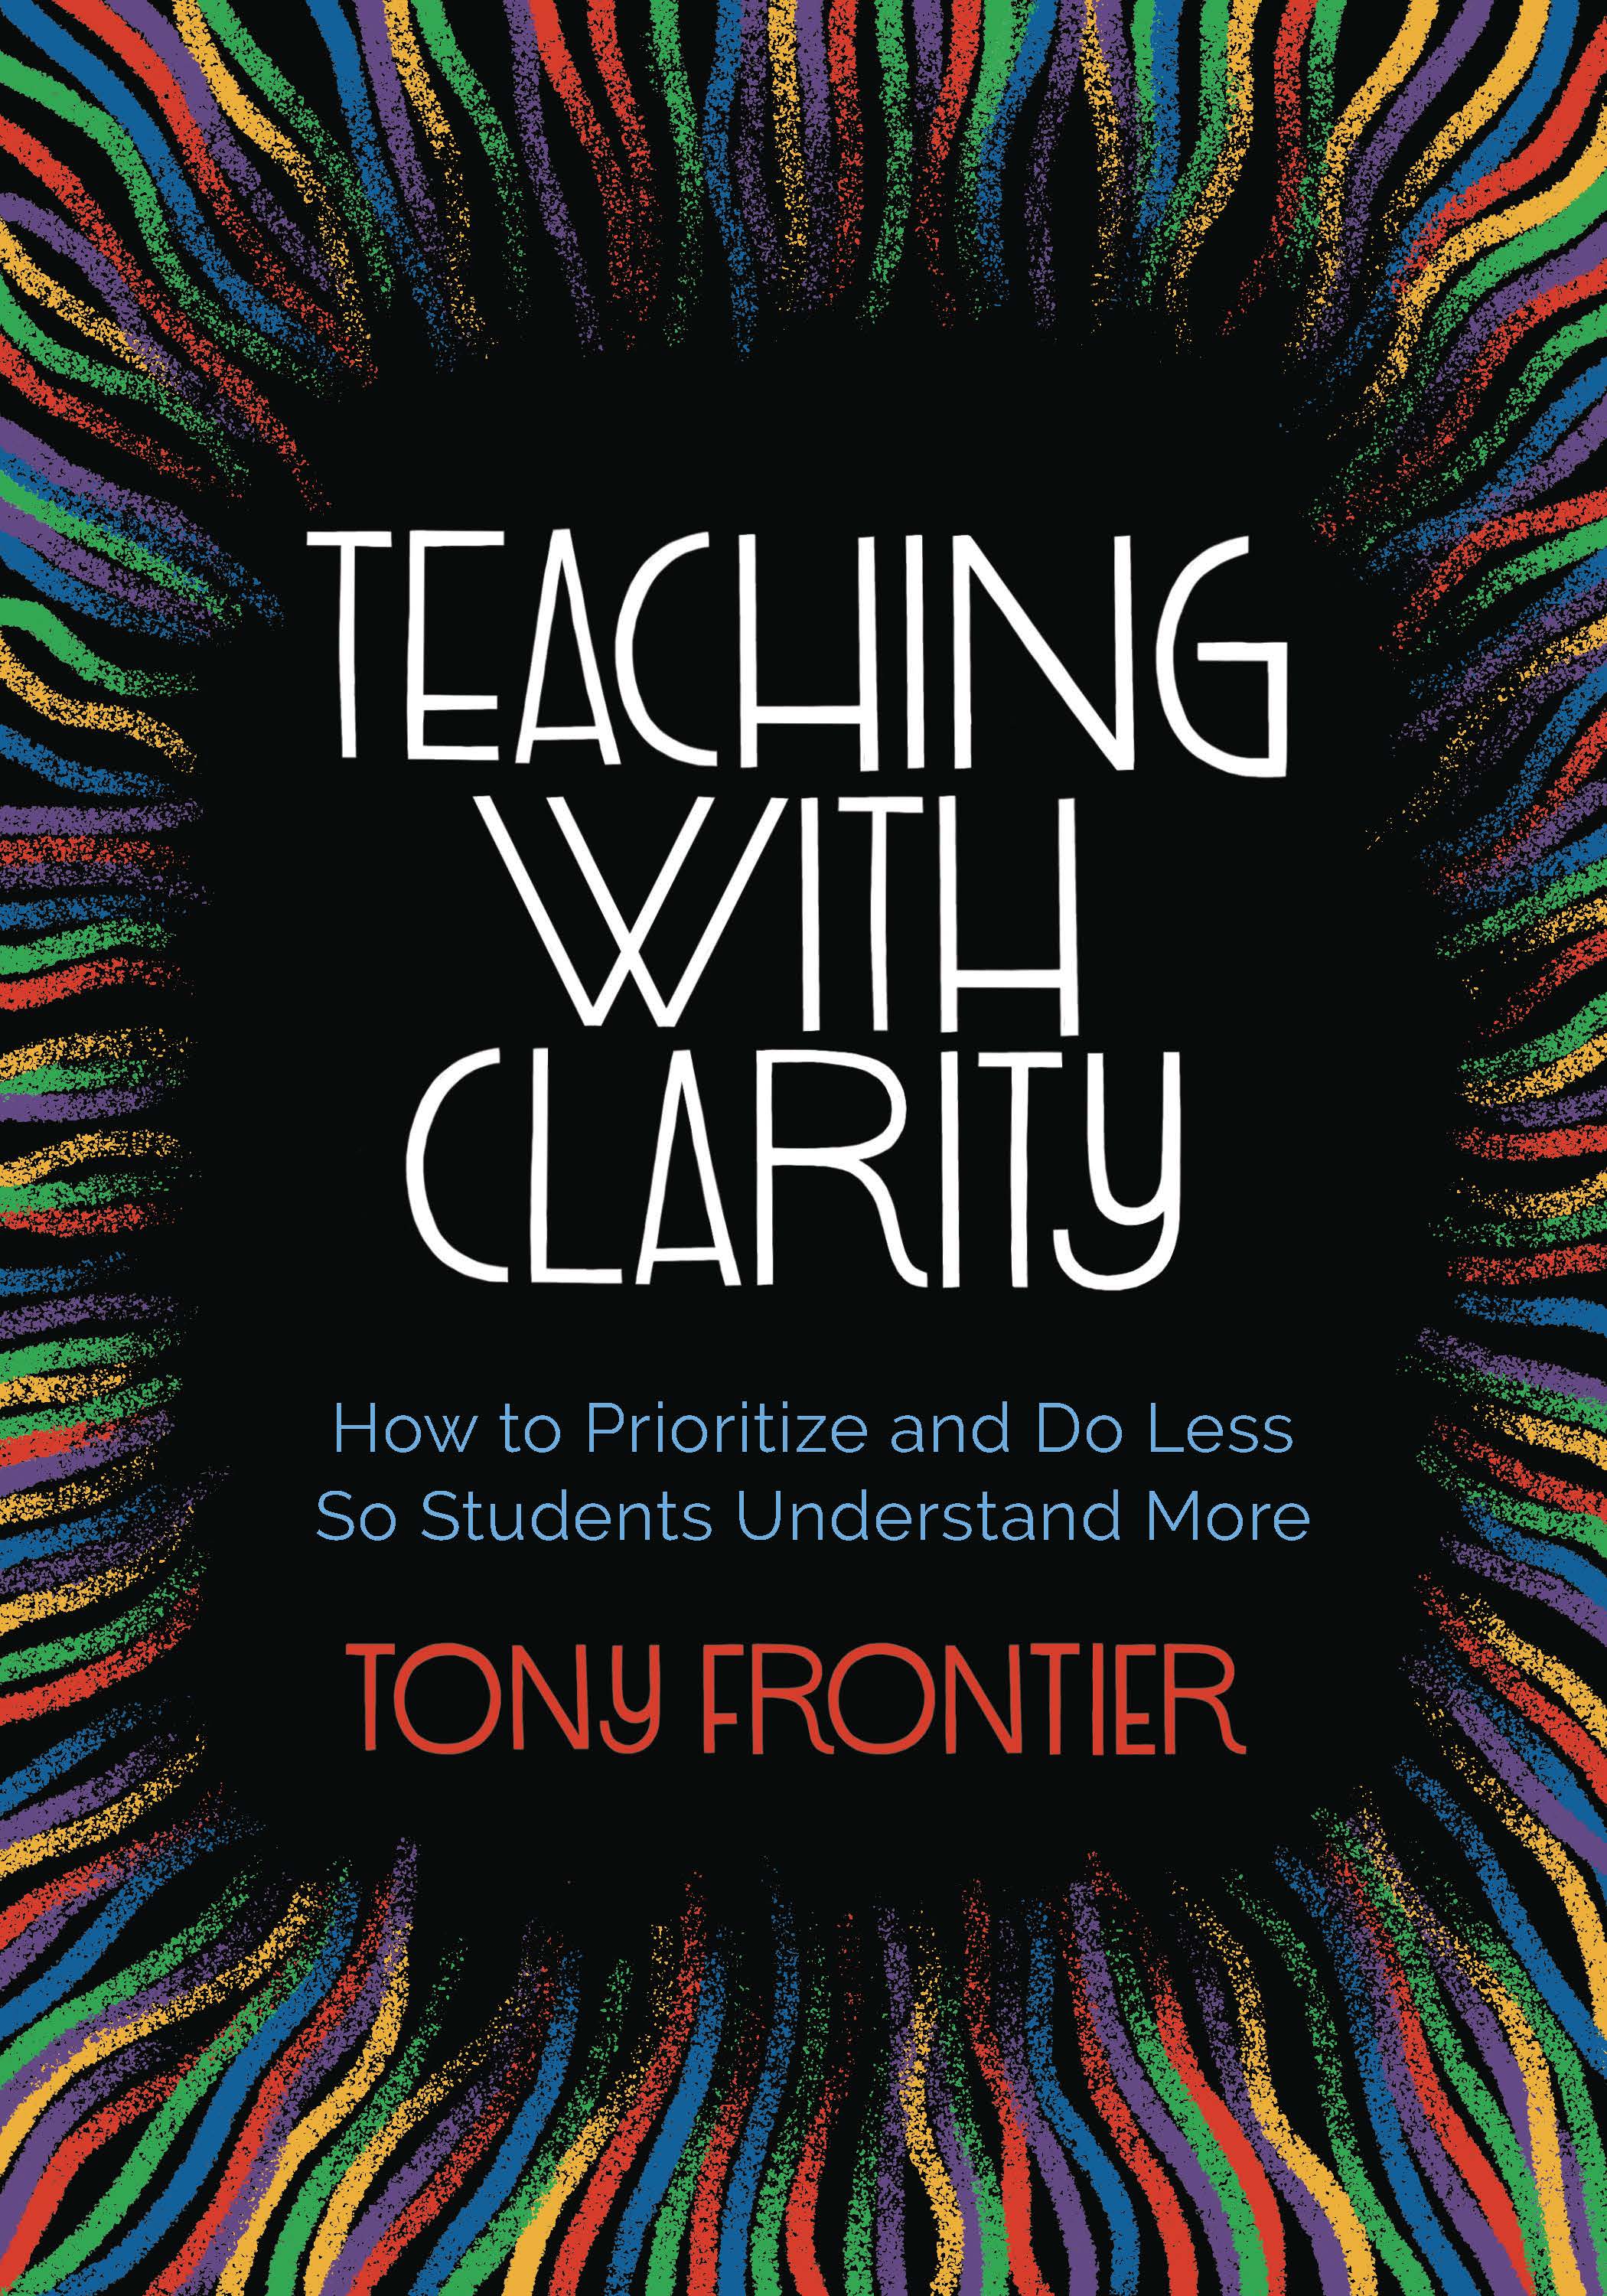 Teaching with Clarity